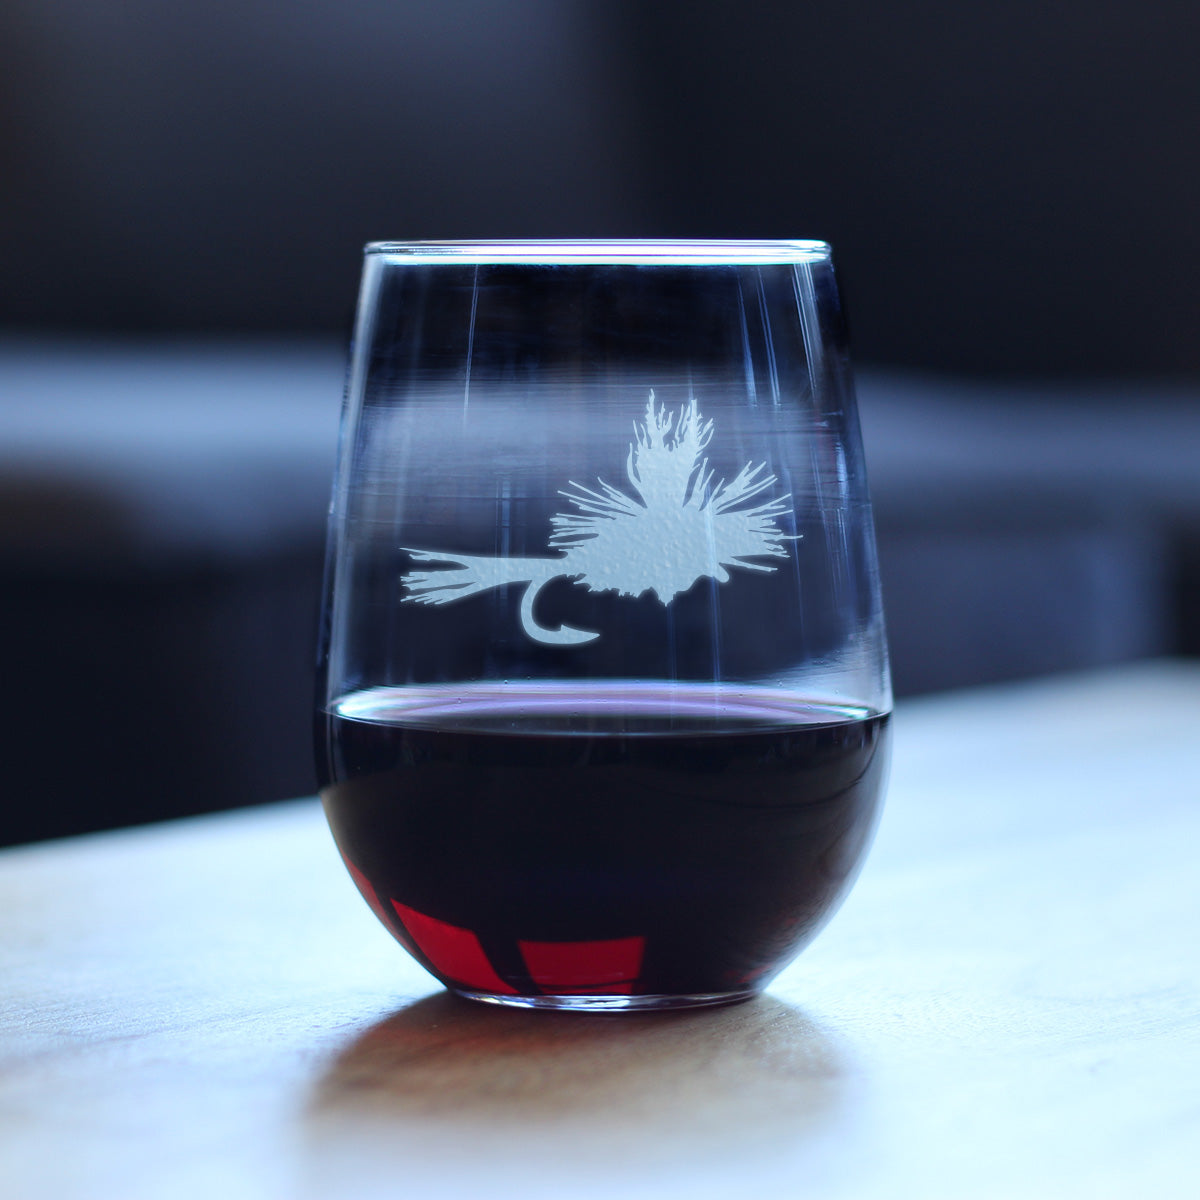 Fly Fishing Stemless Wine Glass - Unique Flyfishing Themed Gifts for Fishermen - Large 17 Oz Glasses